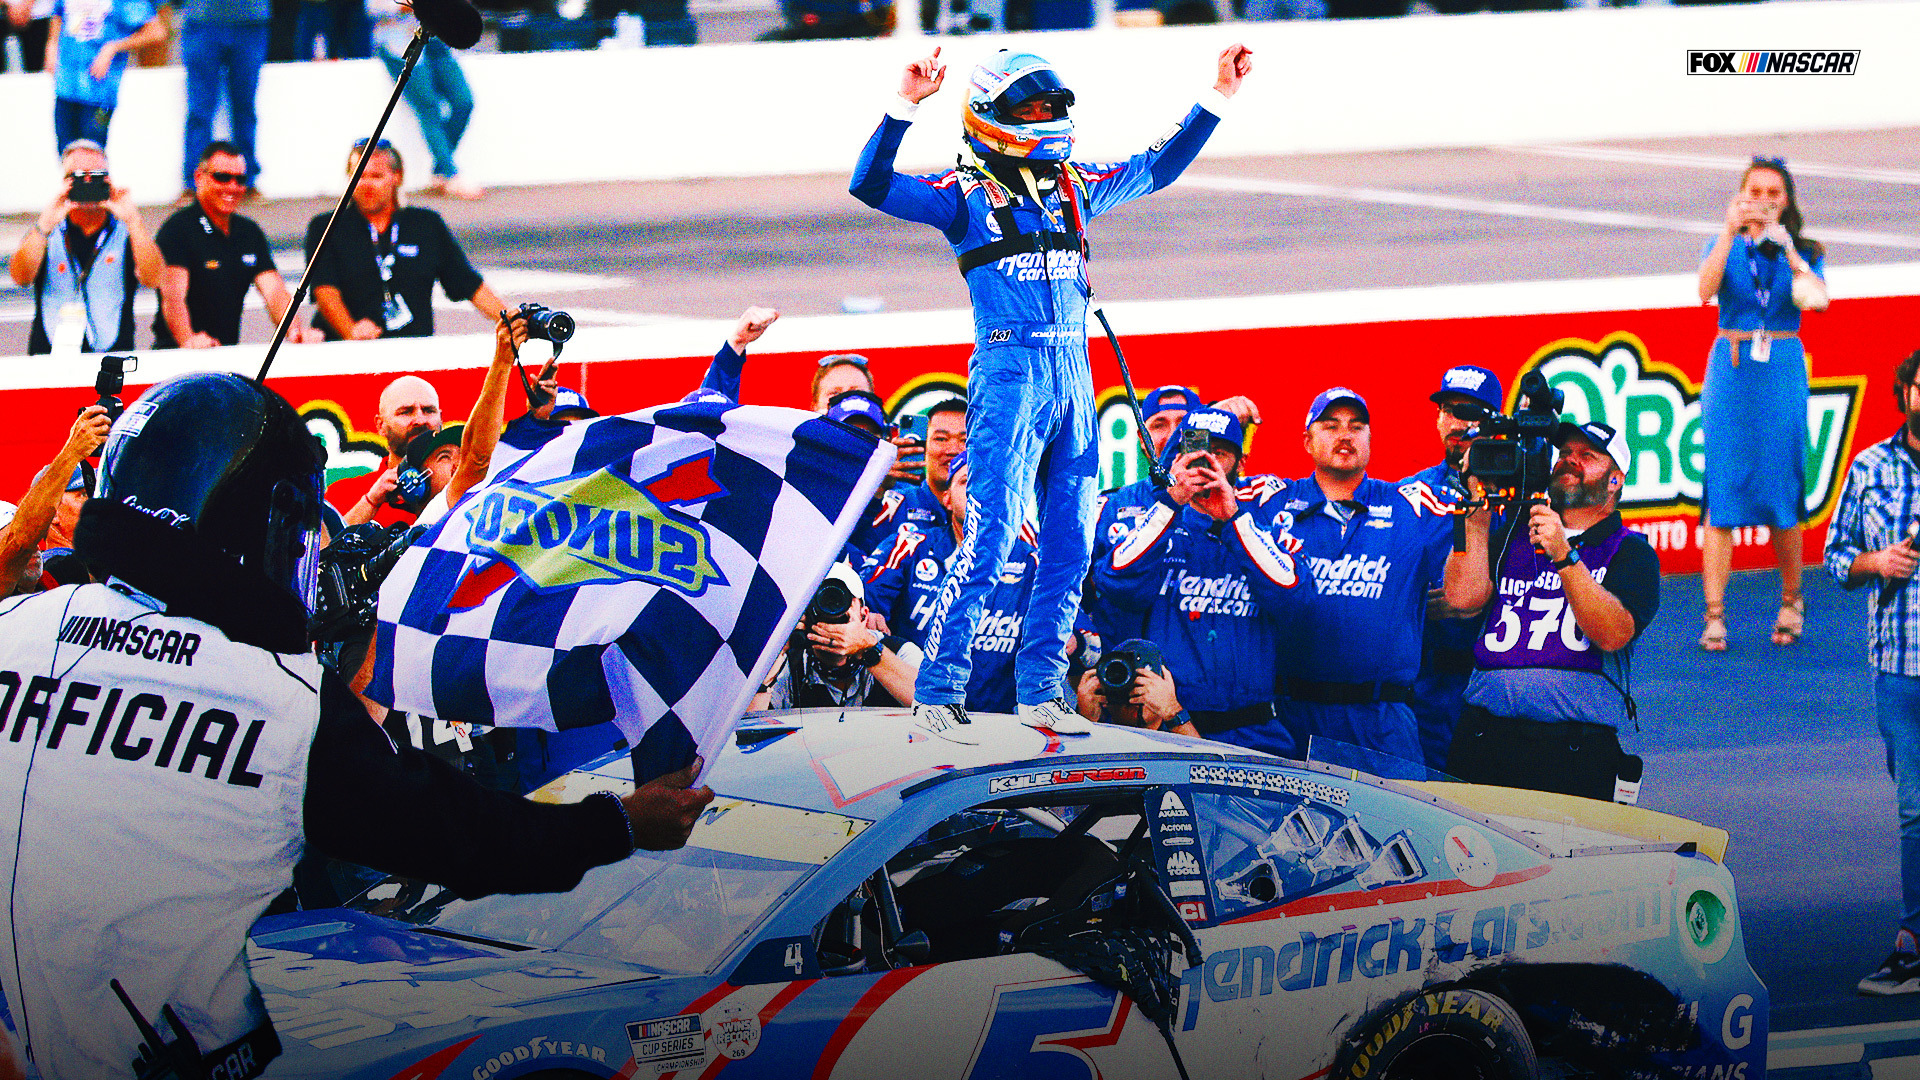 Kyle Larson, Hendrick complete season for the ages with championship at Phoenix